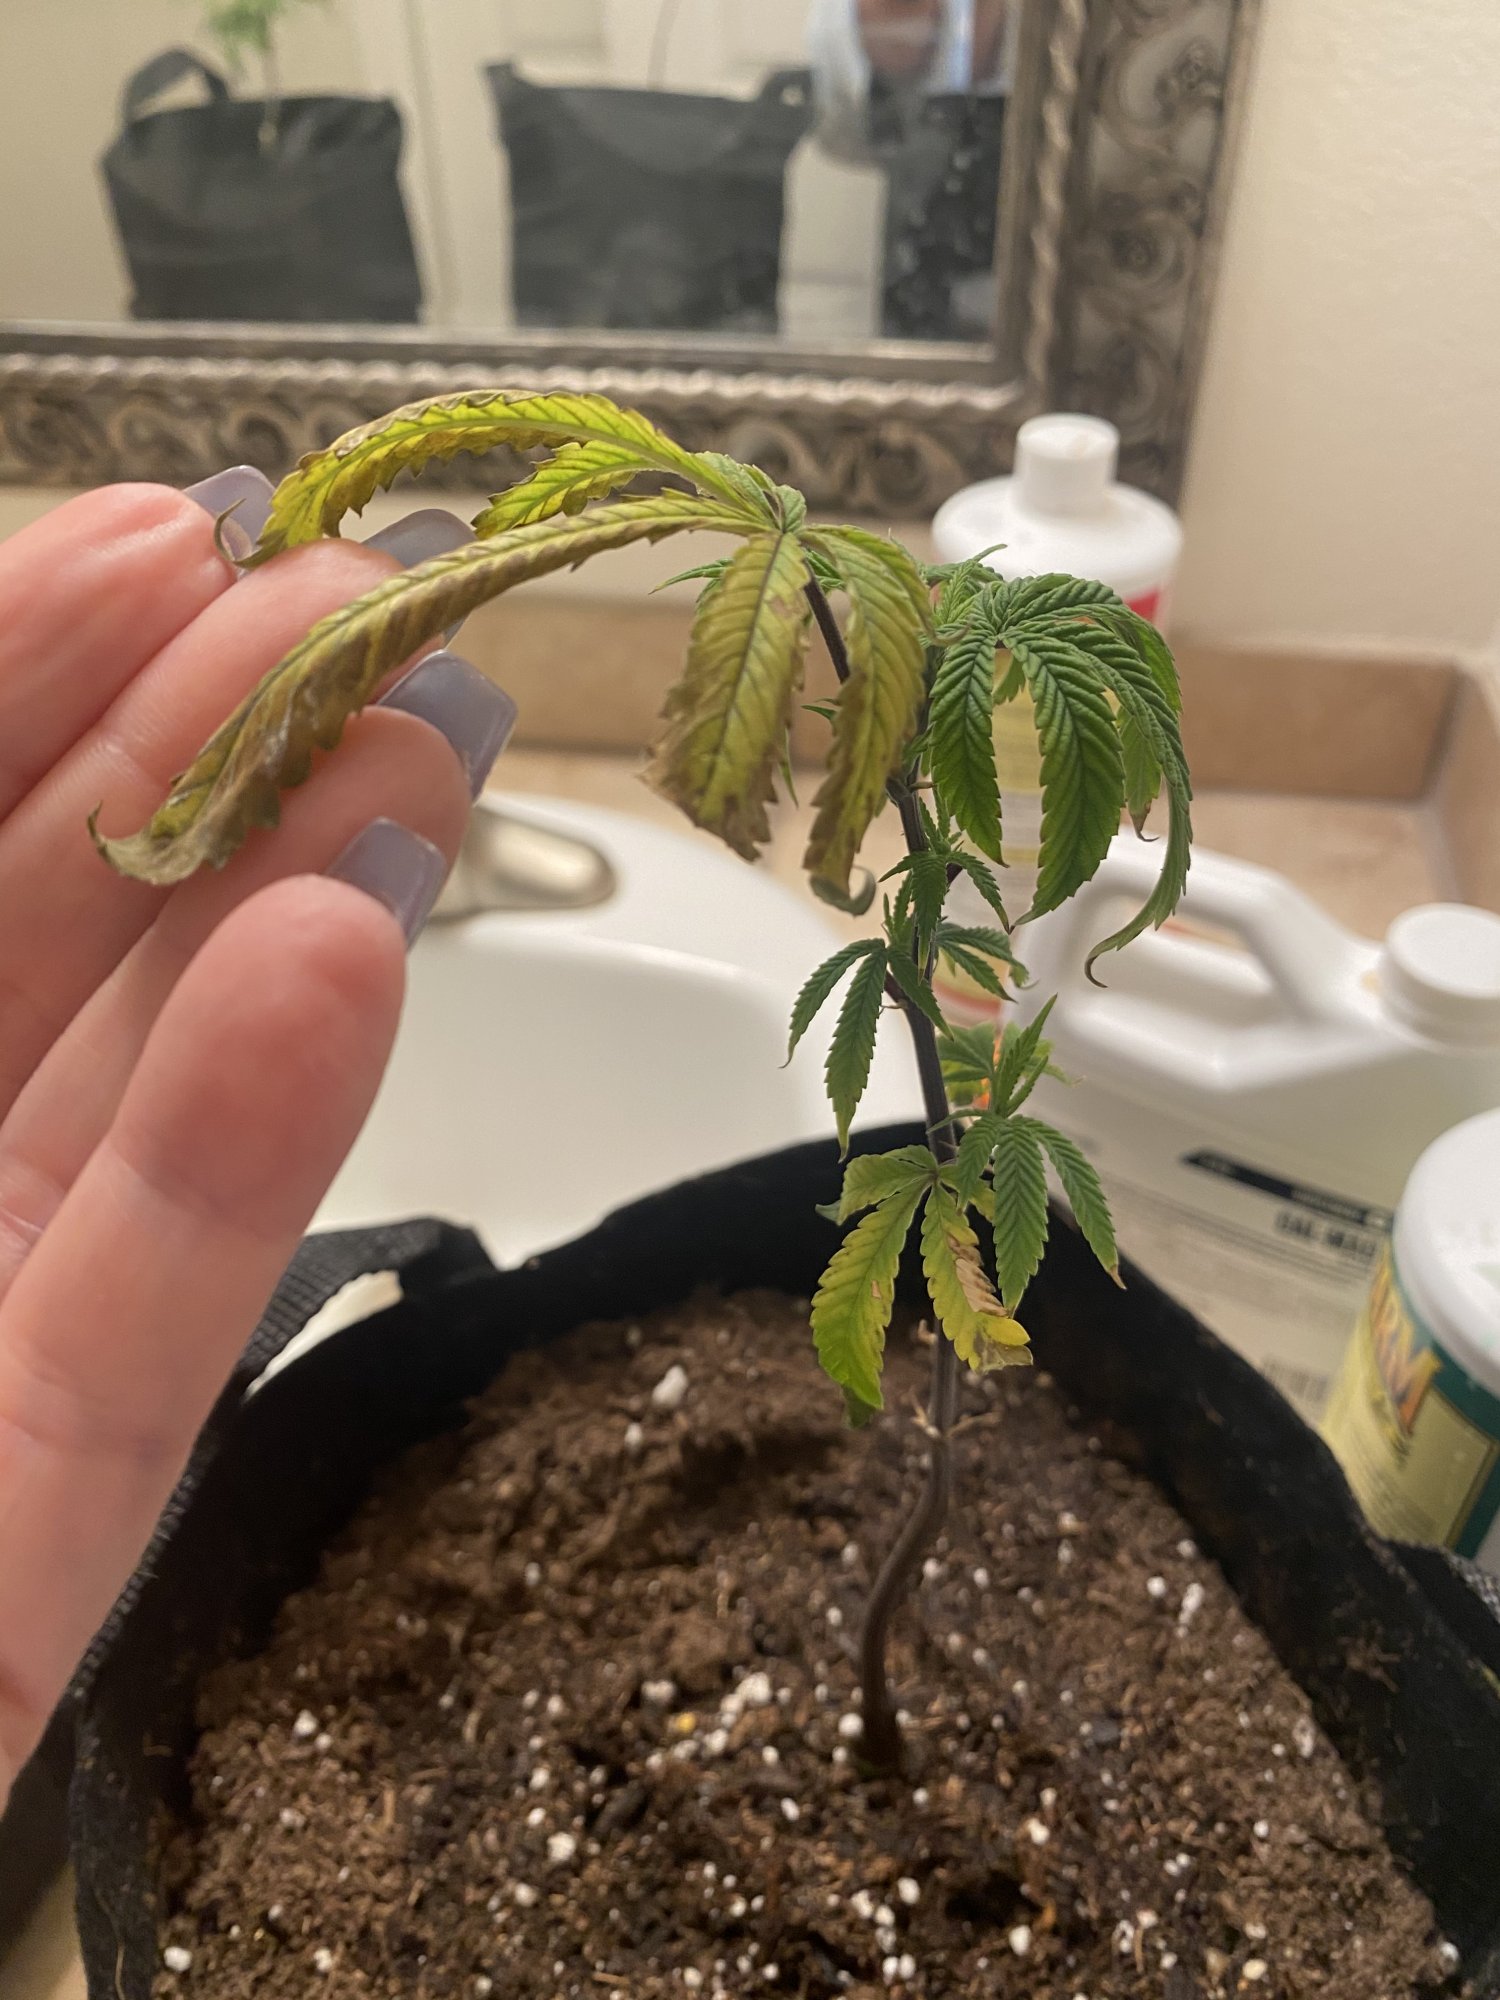 Help new to this and my ladies are sad 3